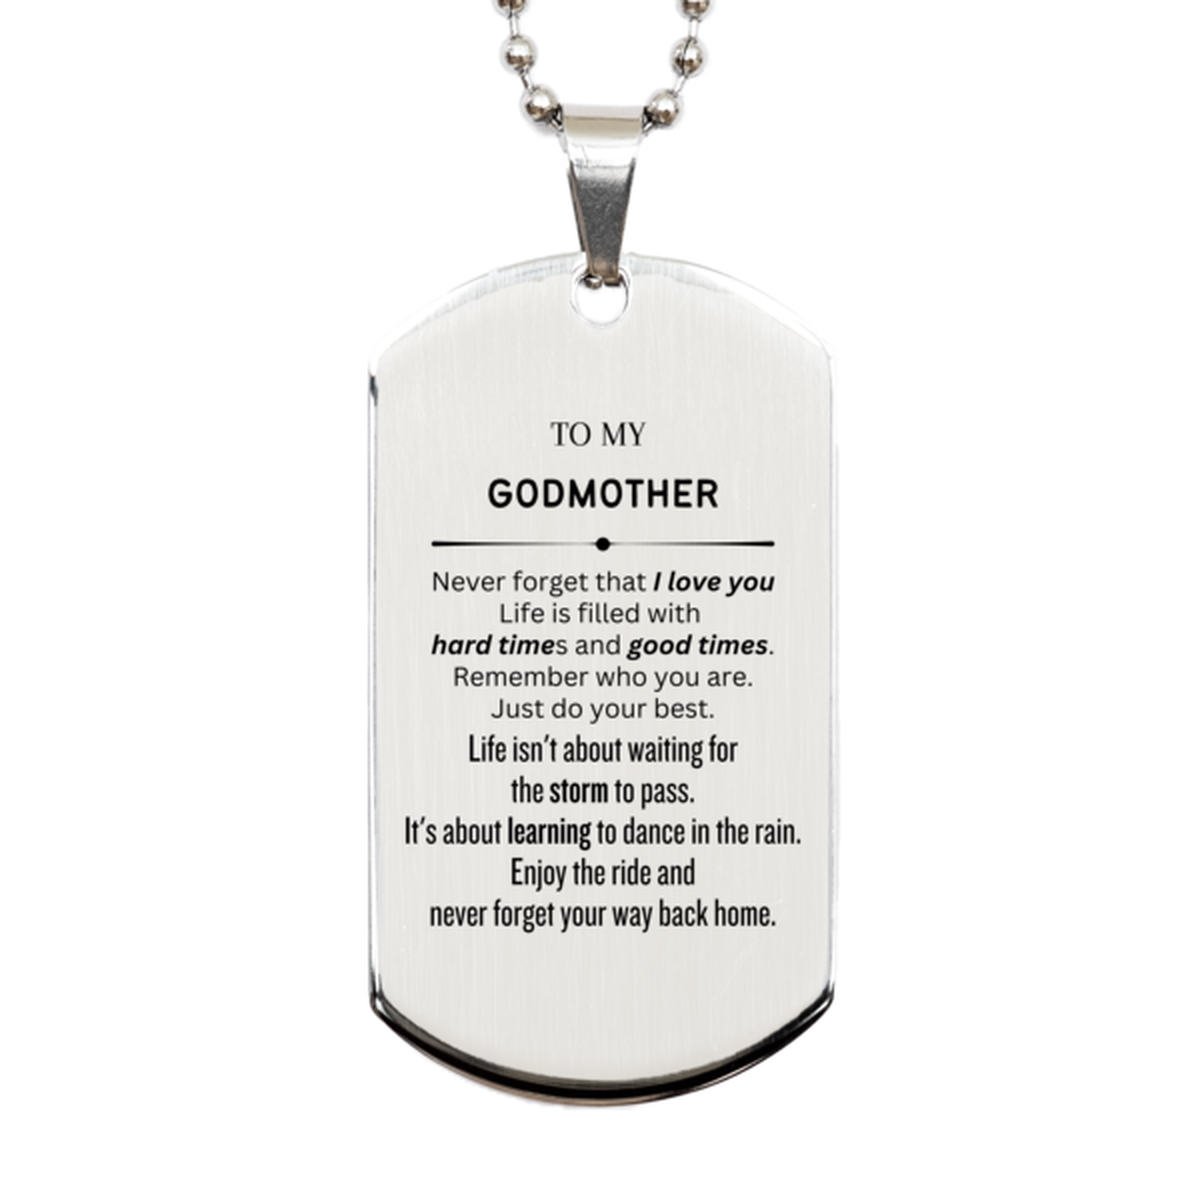 Christmas Godmother Silver Dog Tag Gifts, To My Godmother Birthday Thank You Gifts For Godmother, Graduation Unique Gifts For Godmother To My Godmother Never forget that I love you life is filled with hard times and good times. Remember who you are. Just